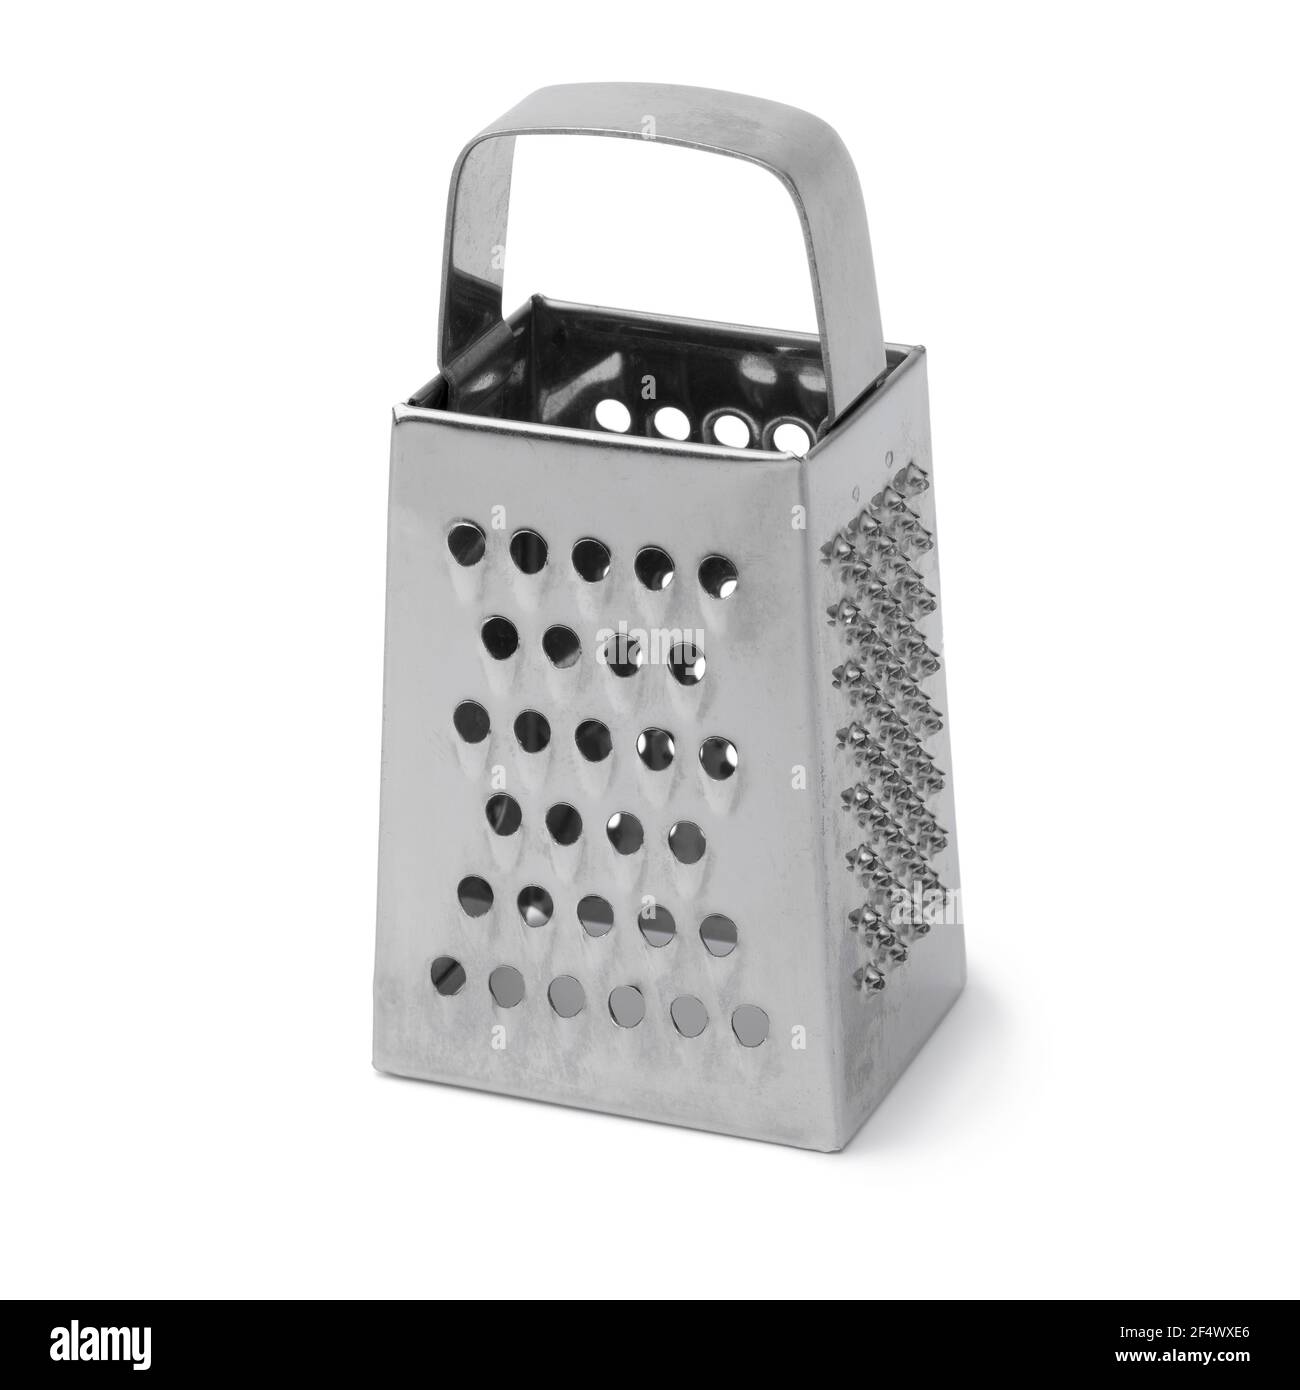 Metal kitchen grater isolated on white background Stock Photo